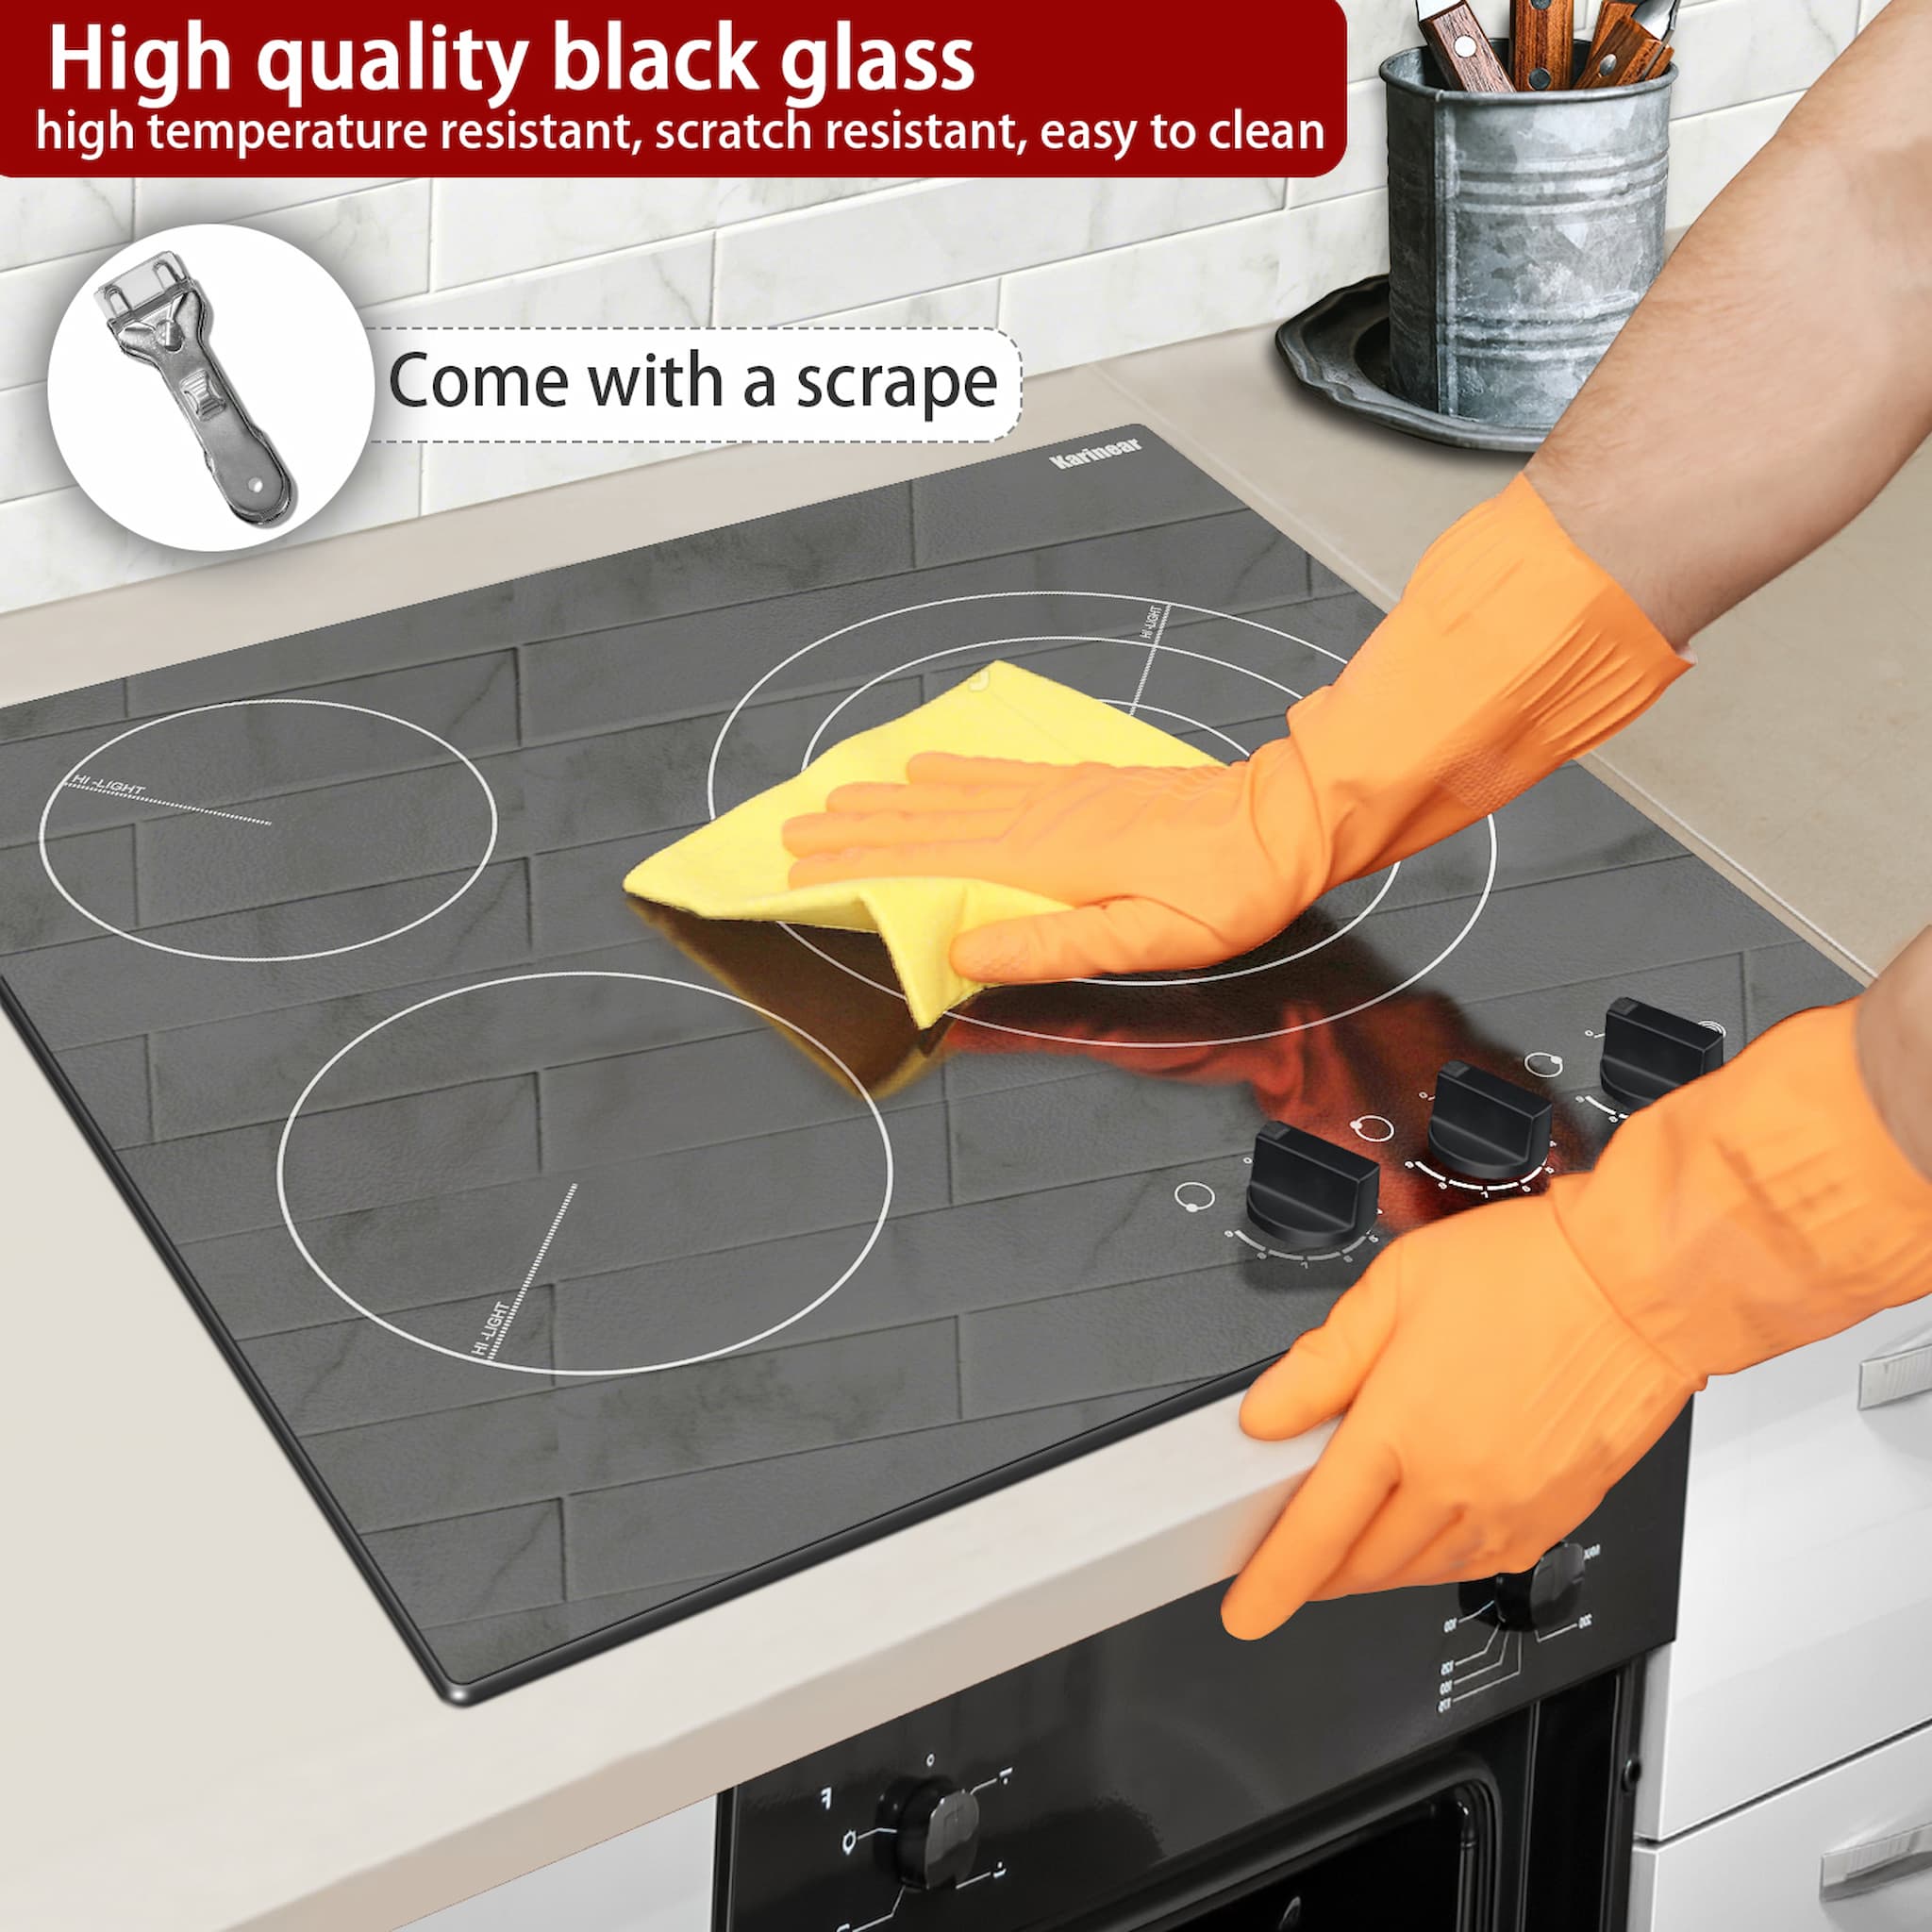 This is a built-in electric cooktop, saving space. With black smooth glass, it looks very fashionable and beautiful. Black glass is durable and easy to clean.